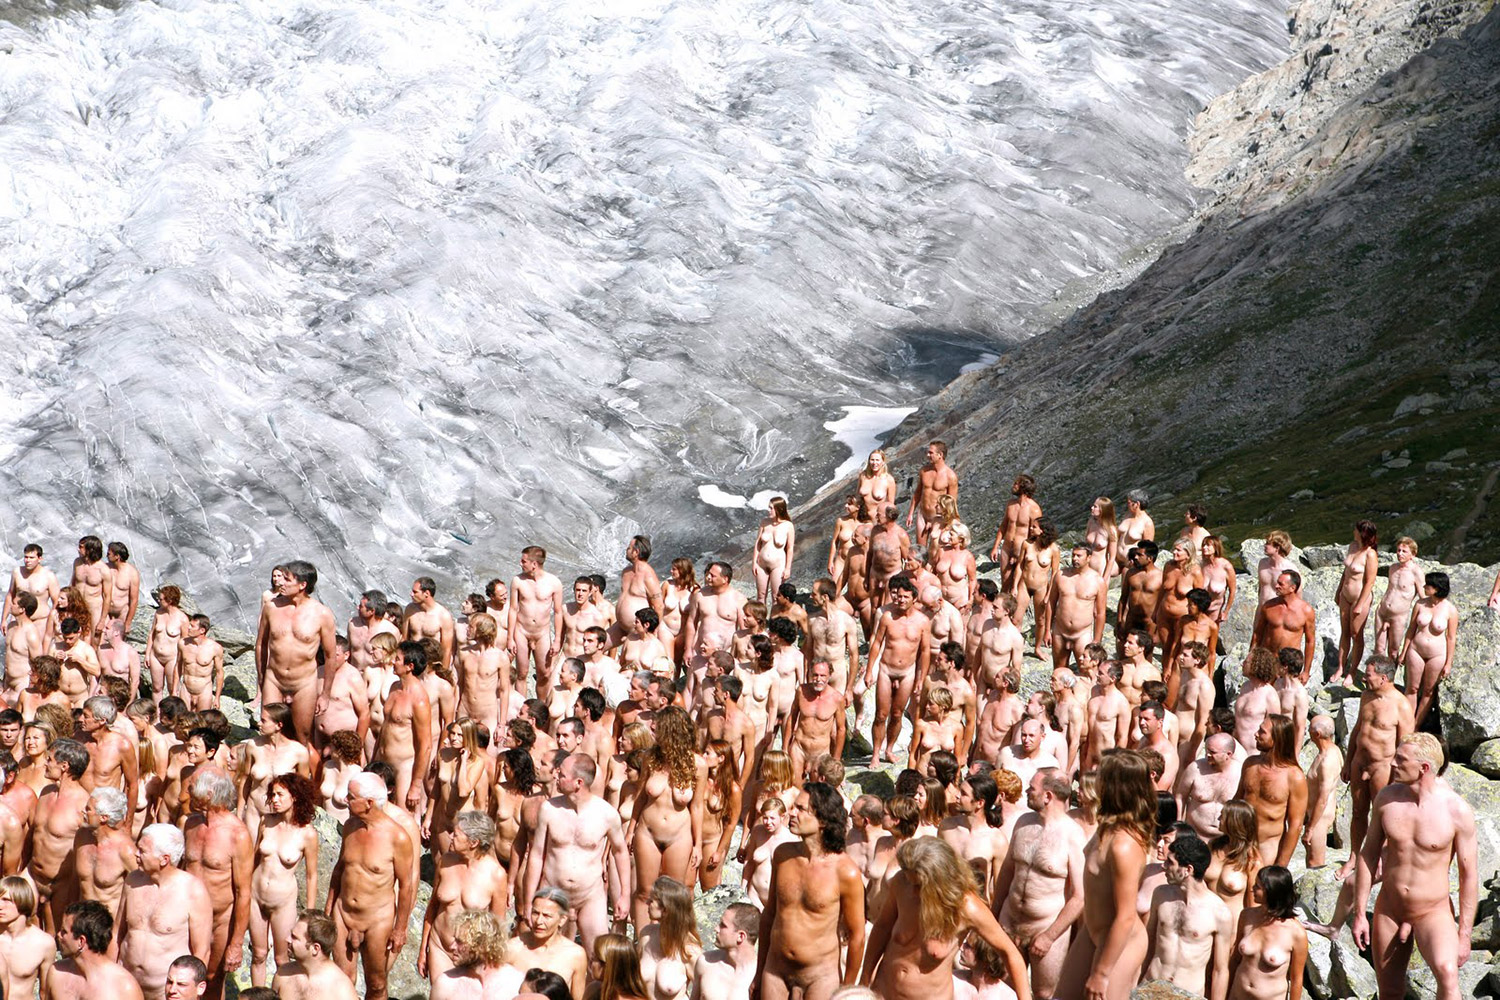 Spencer Tunick - nude body installation on mountainside